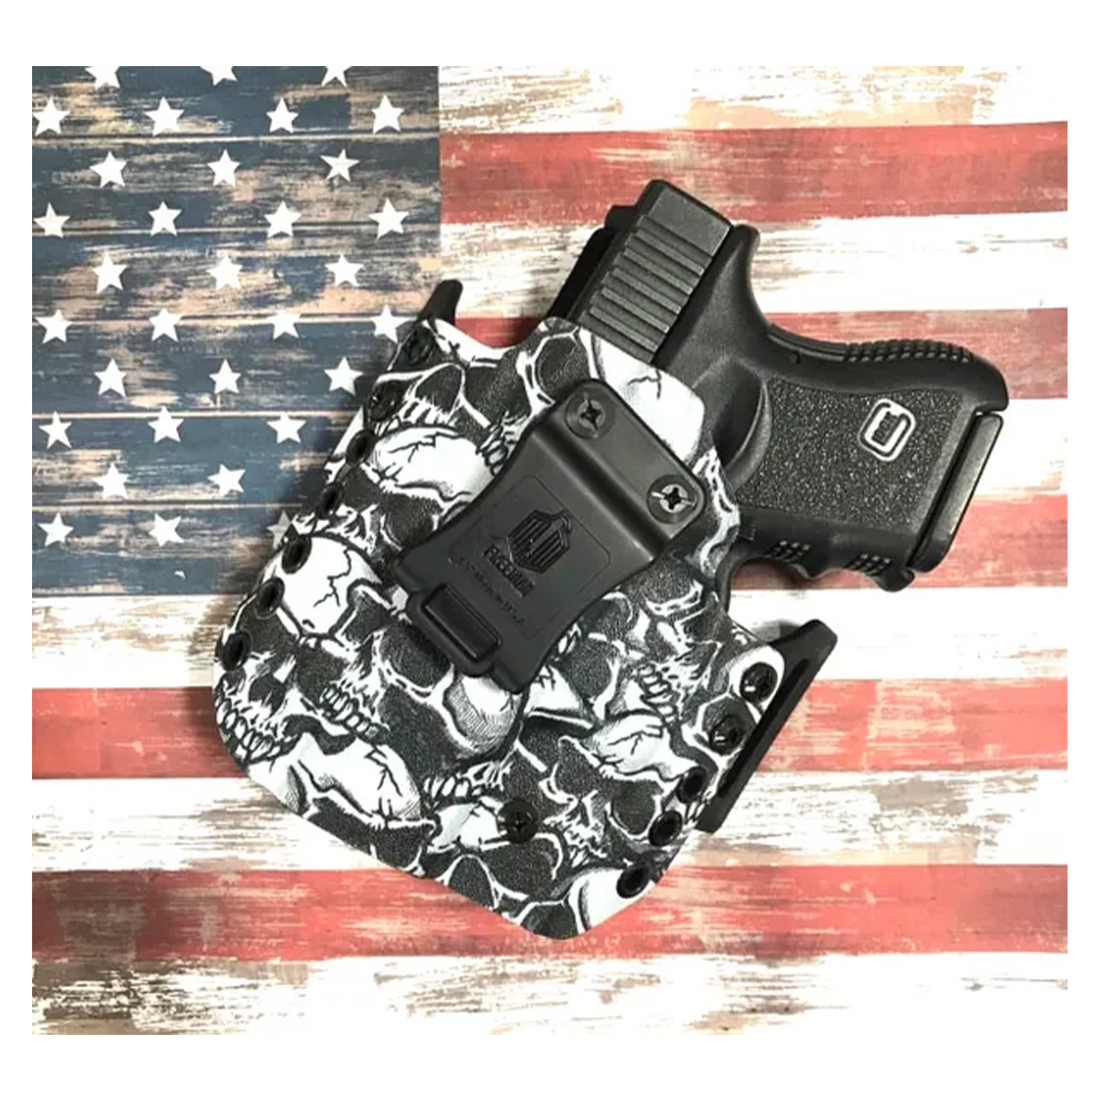 Smith & Wesson IWB/OWB 2-n-1 Holsters